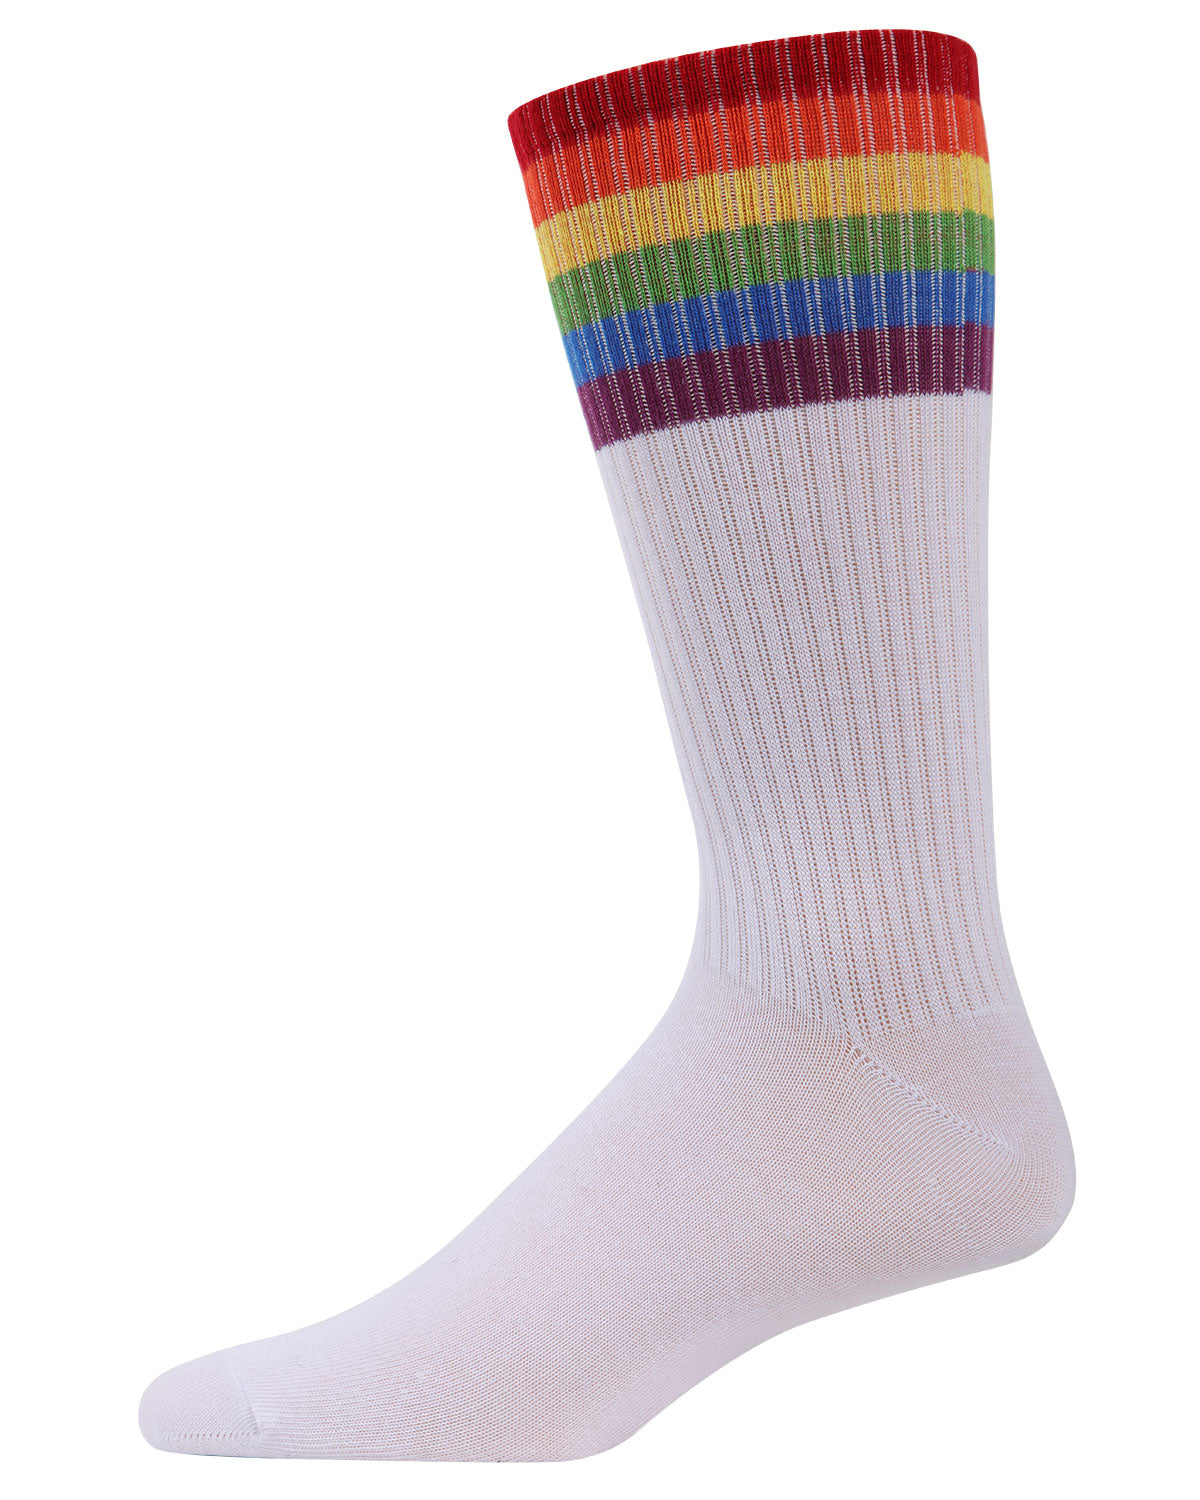 Assorted Multicolor Striped Fuzzy Toe Socks 6 Pack